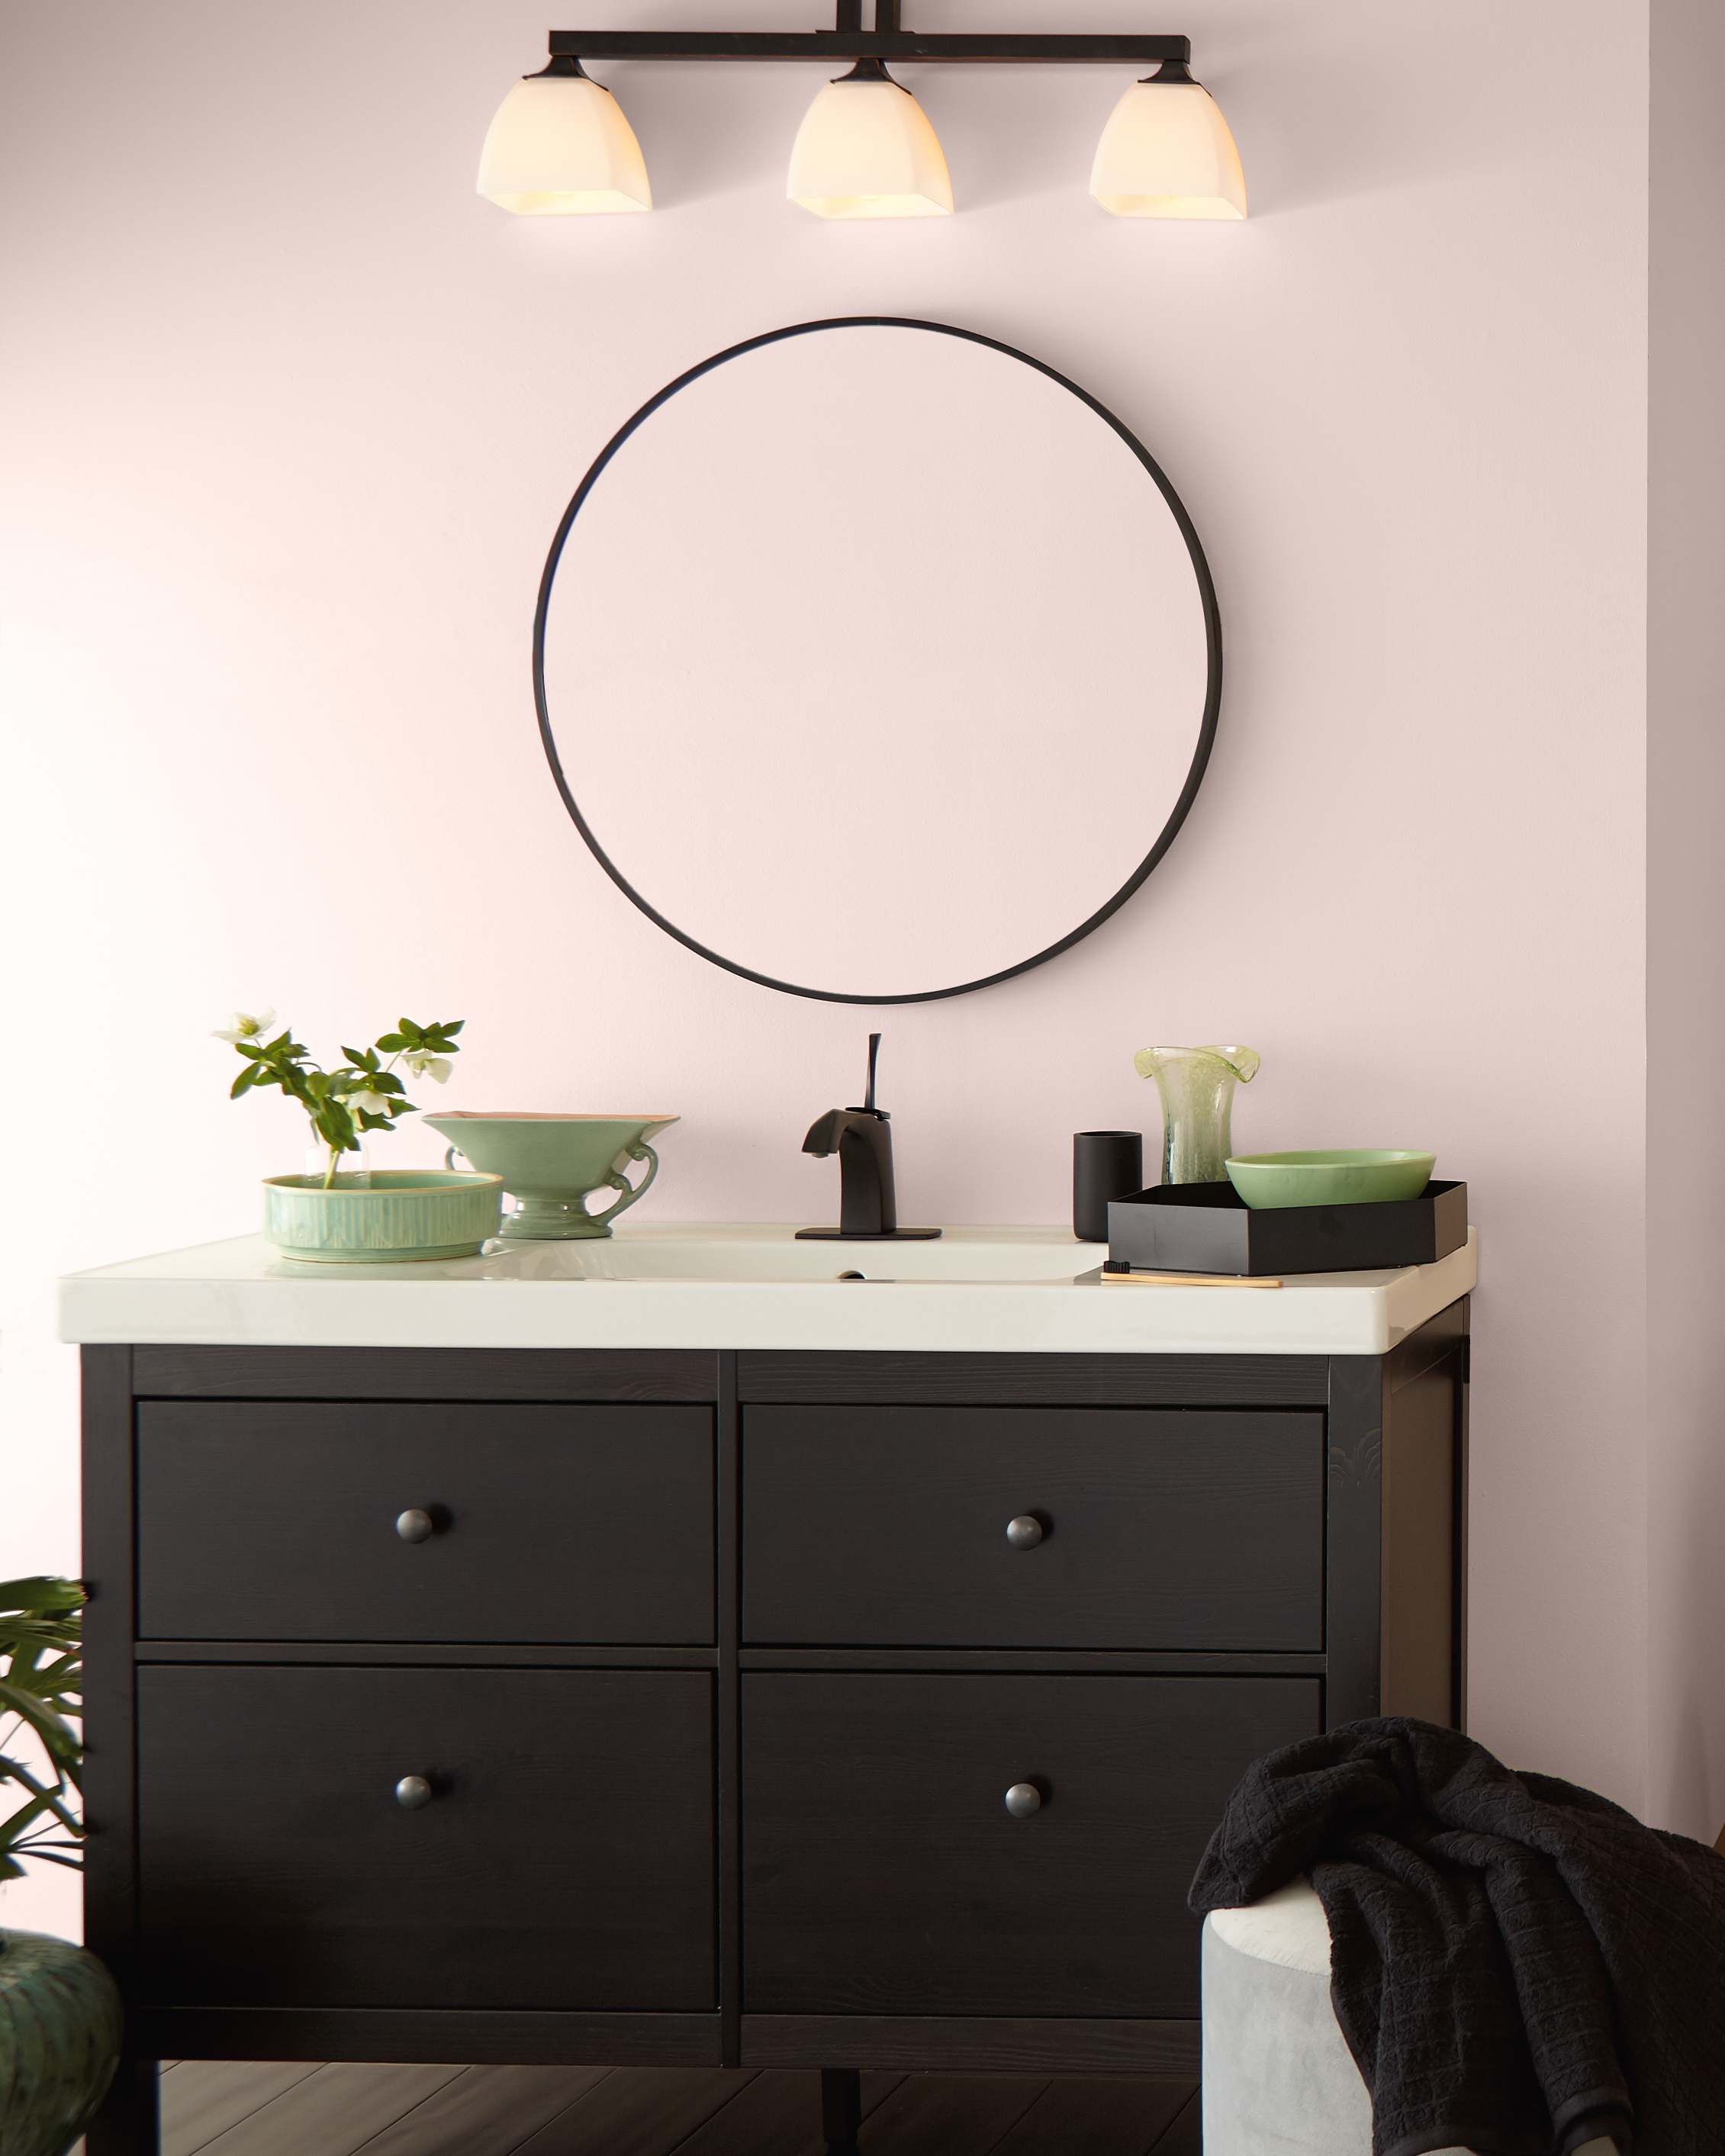 Bathroom image that showcases sink vanity. Decor in sage green accents. Circular mirror and walls painted in Stolen Kiss a delicate light rose tone.